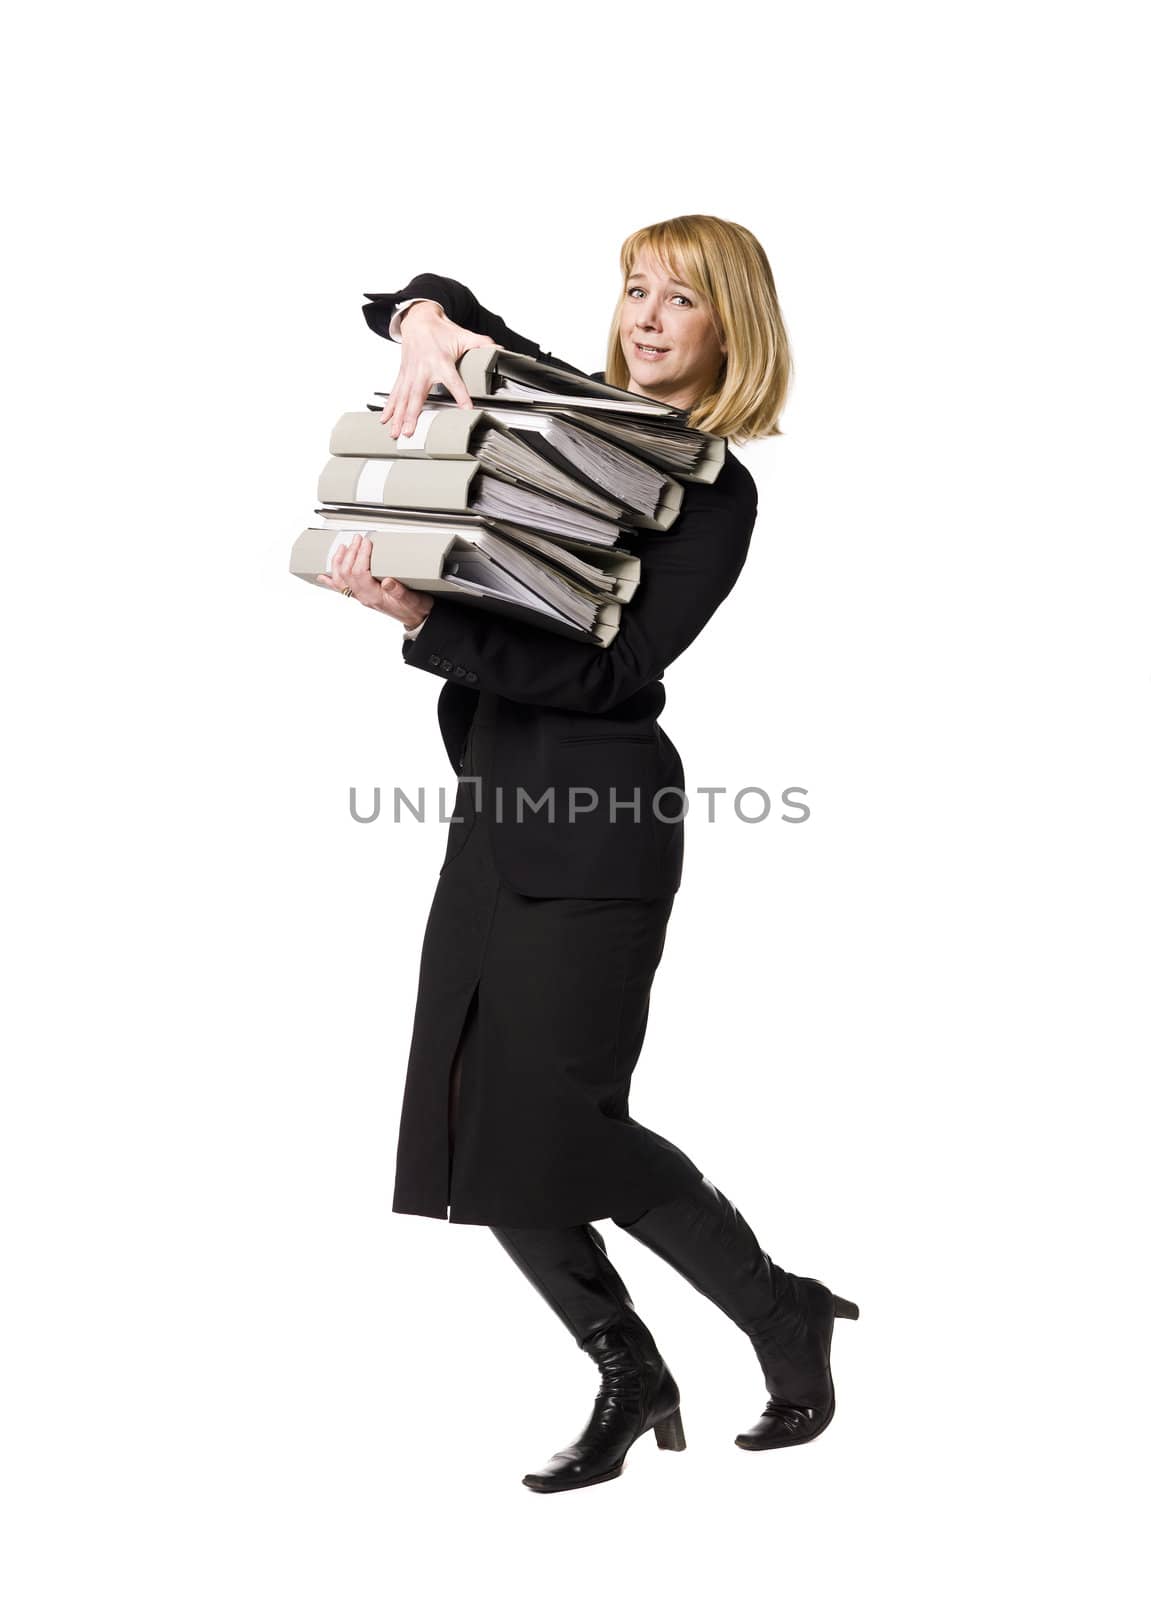 Woman overloaded with work